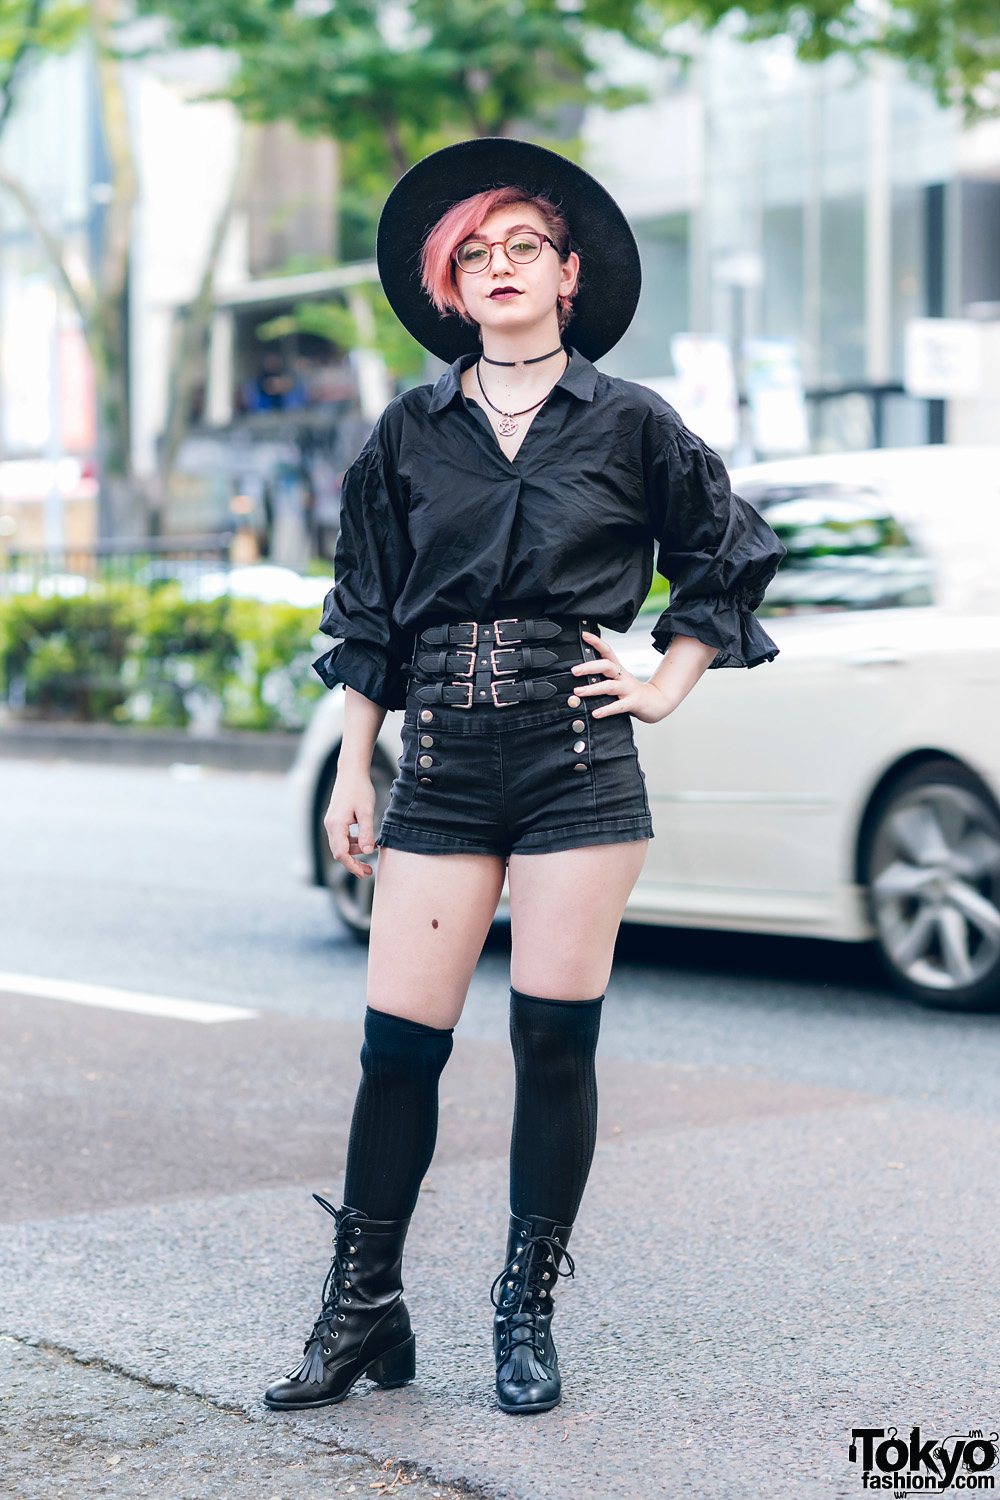 All Black Streetwear Style in Harajuku w/ Red Hair, Del Monico Wide Brim Hat, High-Waisted Shorts, Noble Noir Jewelry & Current Mood Boots